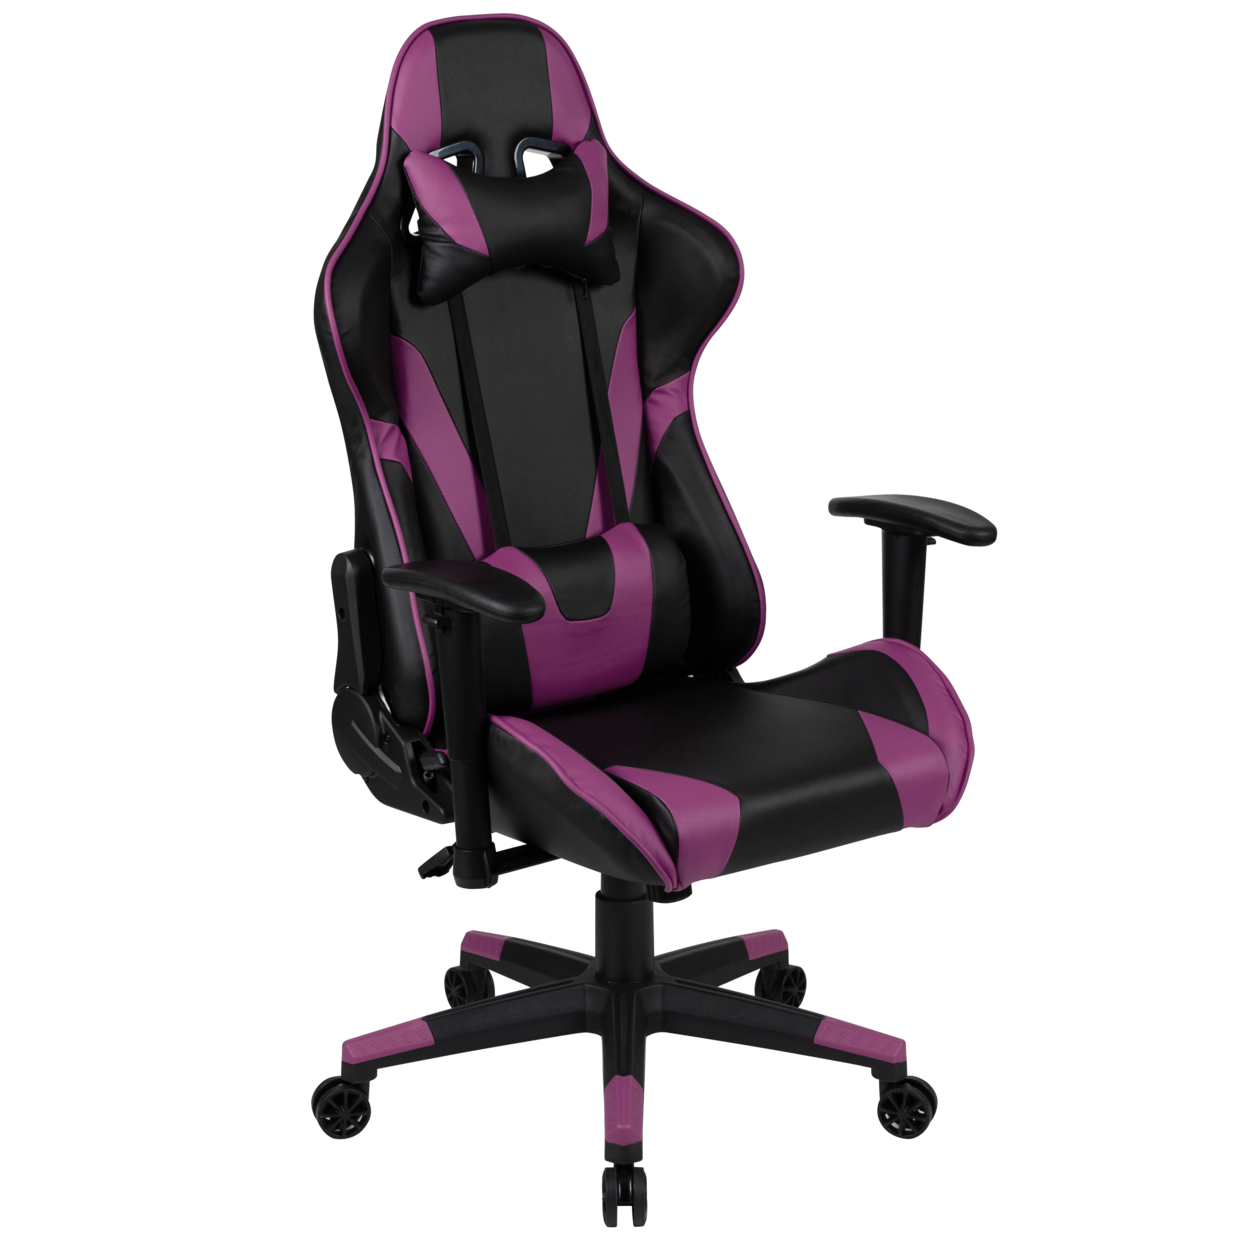 X20 Gaming Chair Racing Office Ergonomic Computer PC Adjustable Swivel Chair With Fully Reclining Back In Purple LeatherSoft